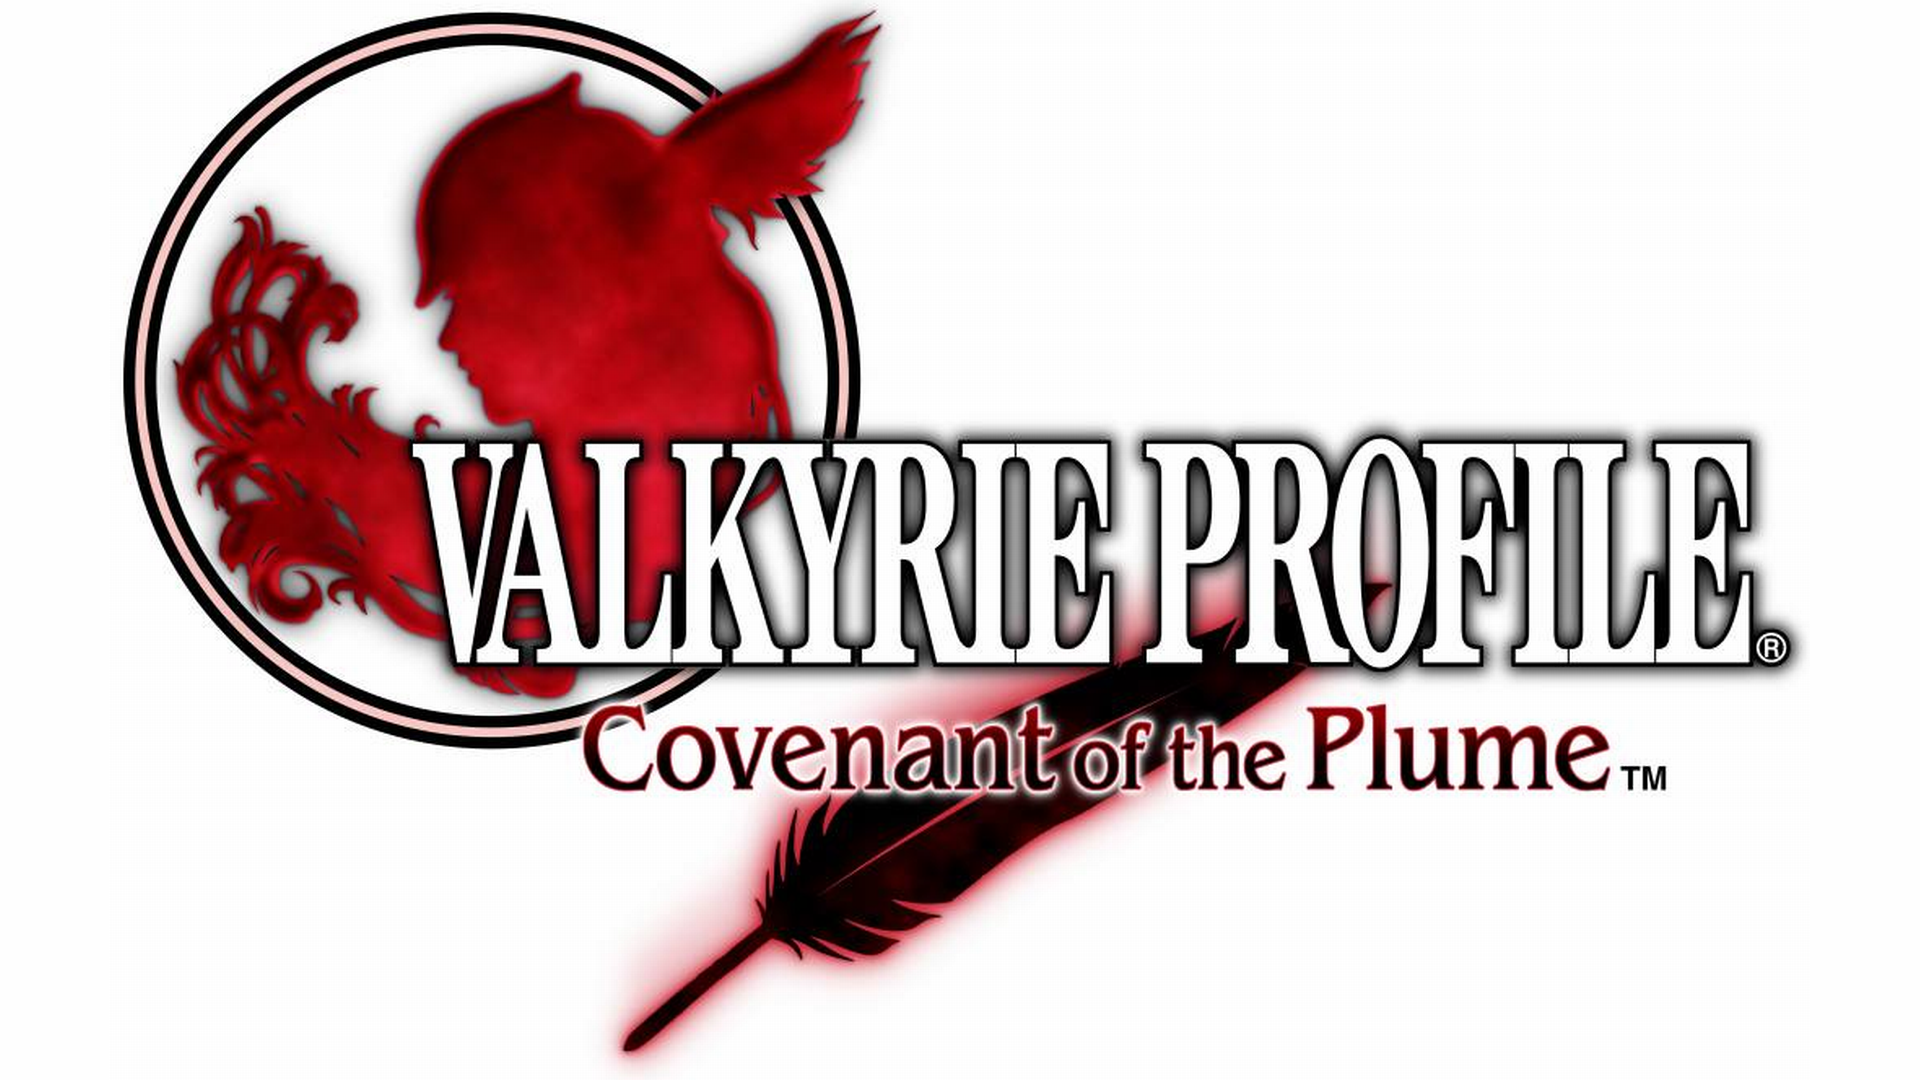 Valkyrie Profile: Covenant of the Plume Logo